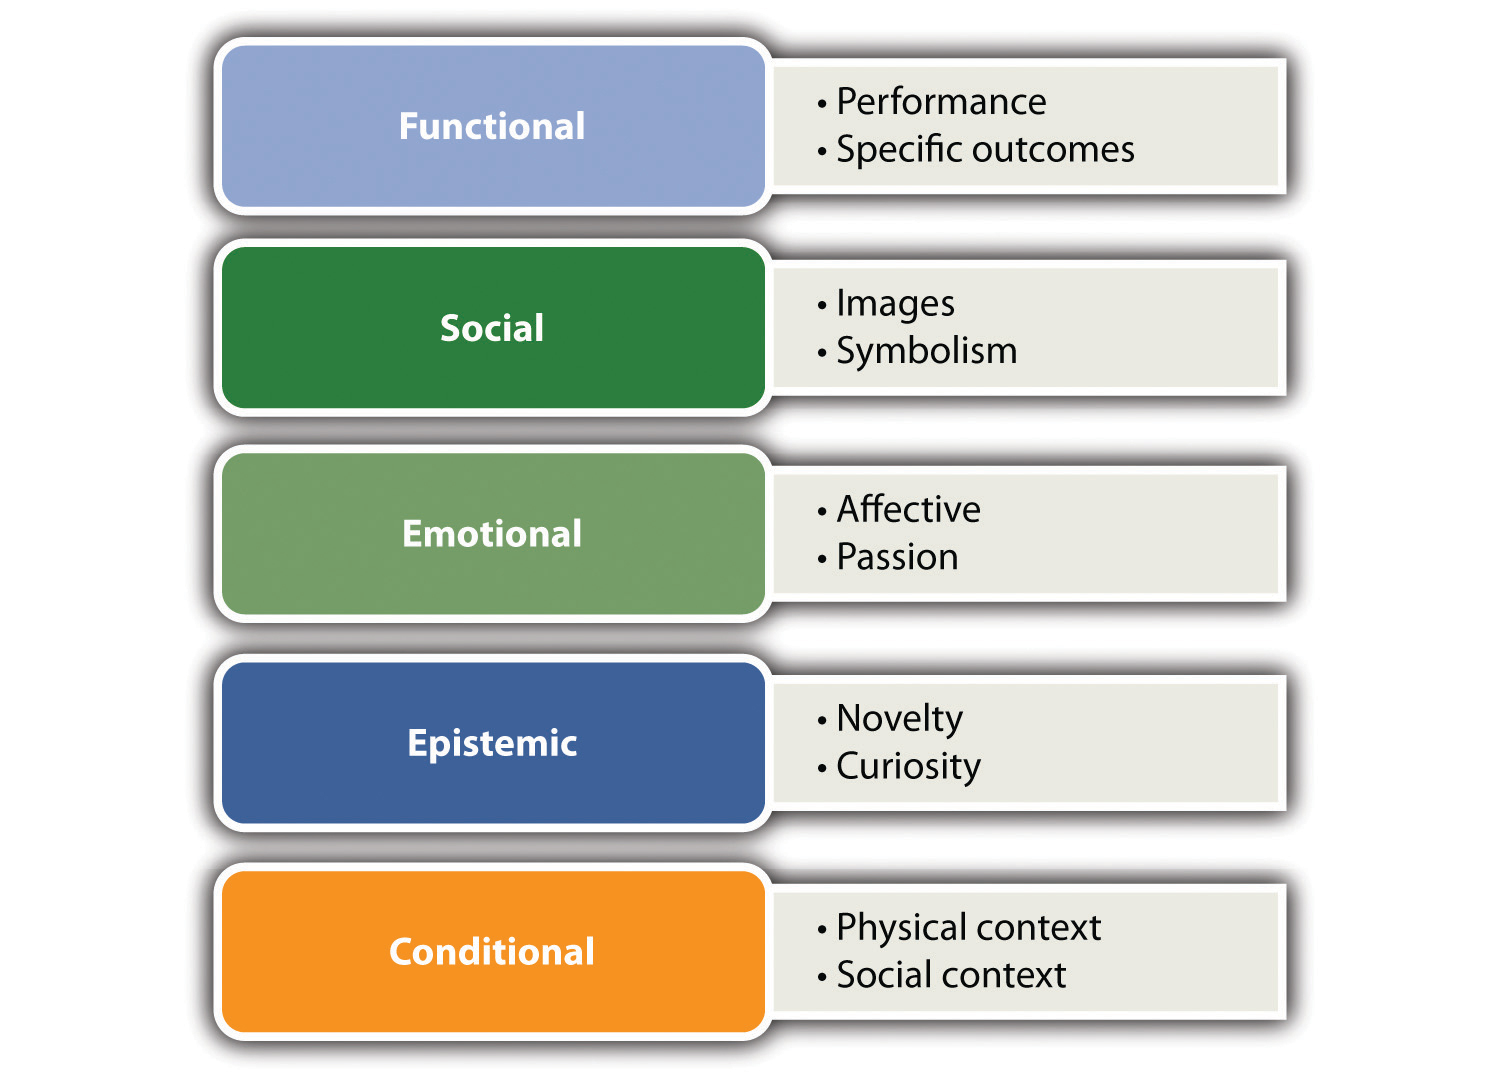 Five types of value - functional, social, emotional, epistemic, conditional